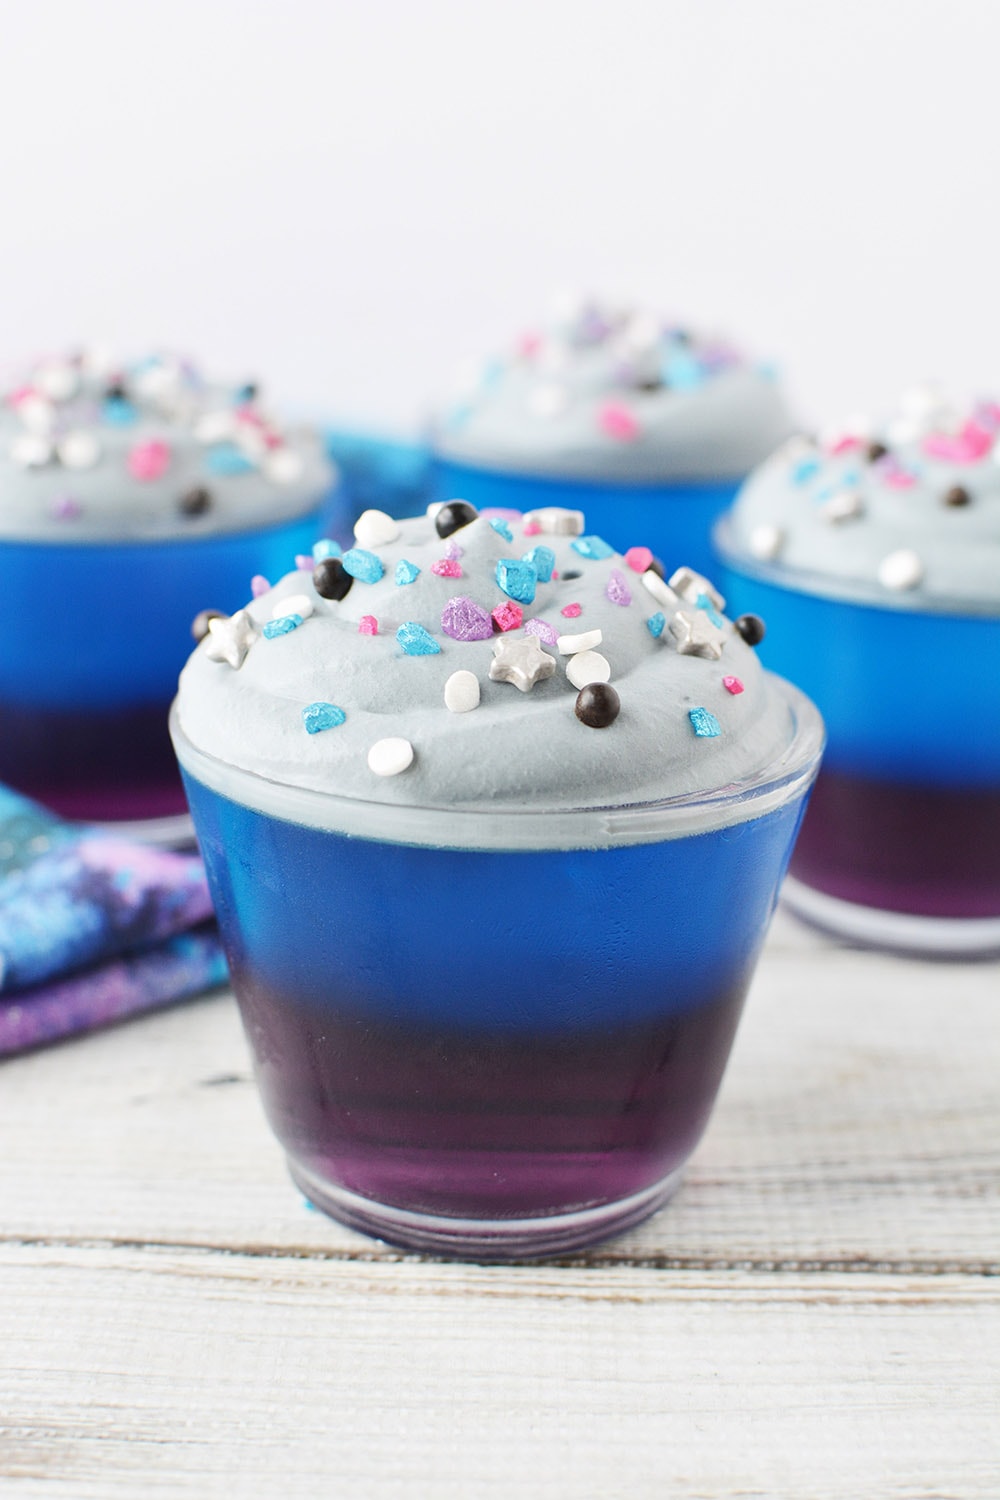 Layered jello topped with gray whipped cream and galaxy sprinkles.